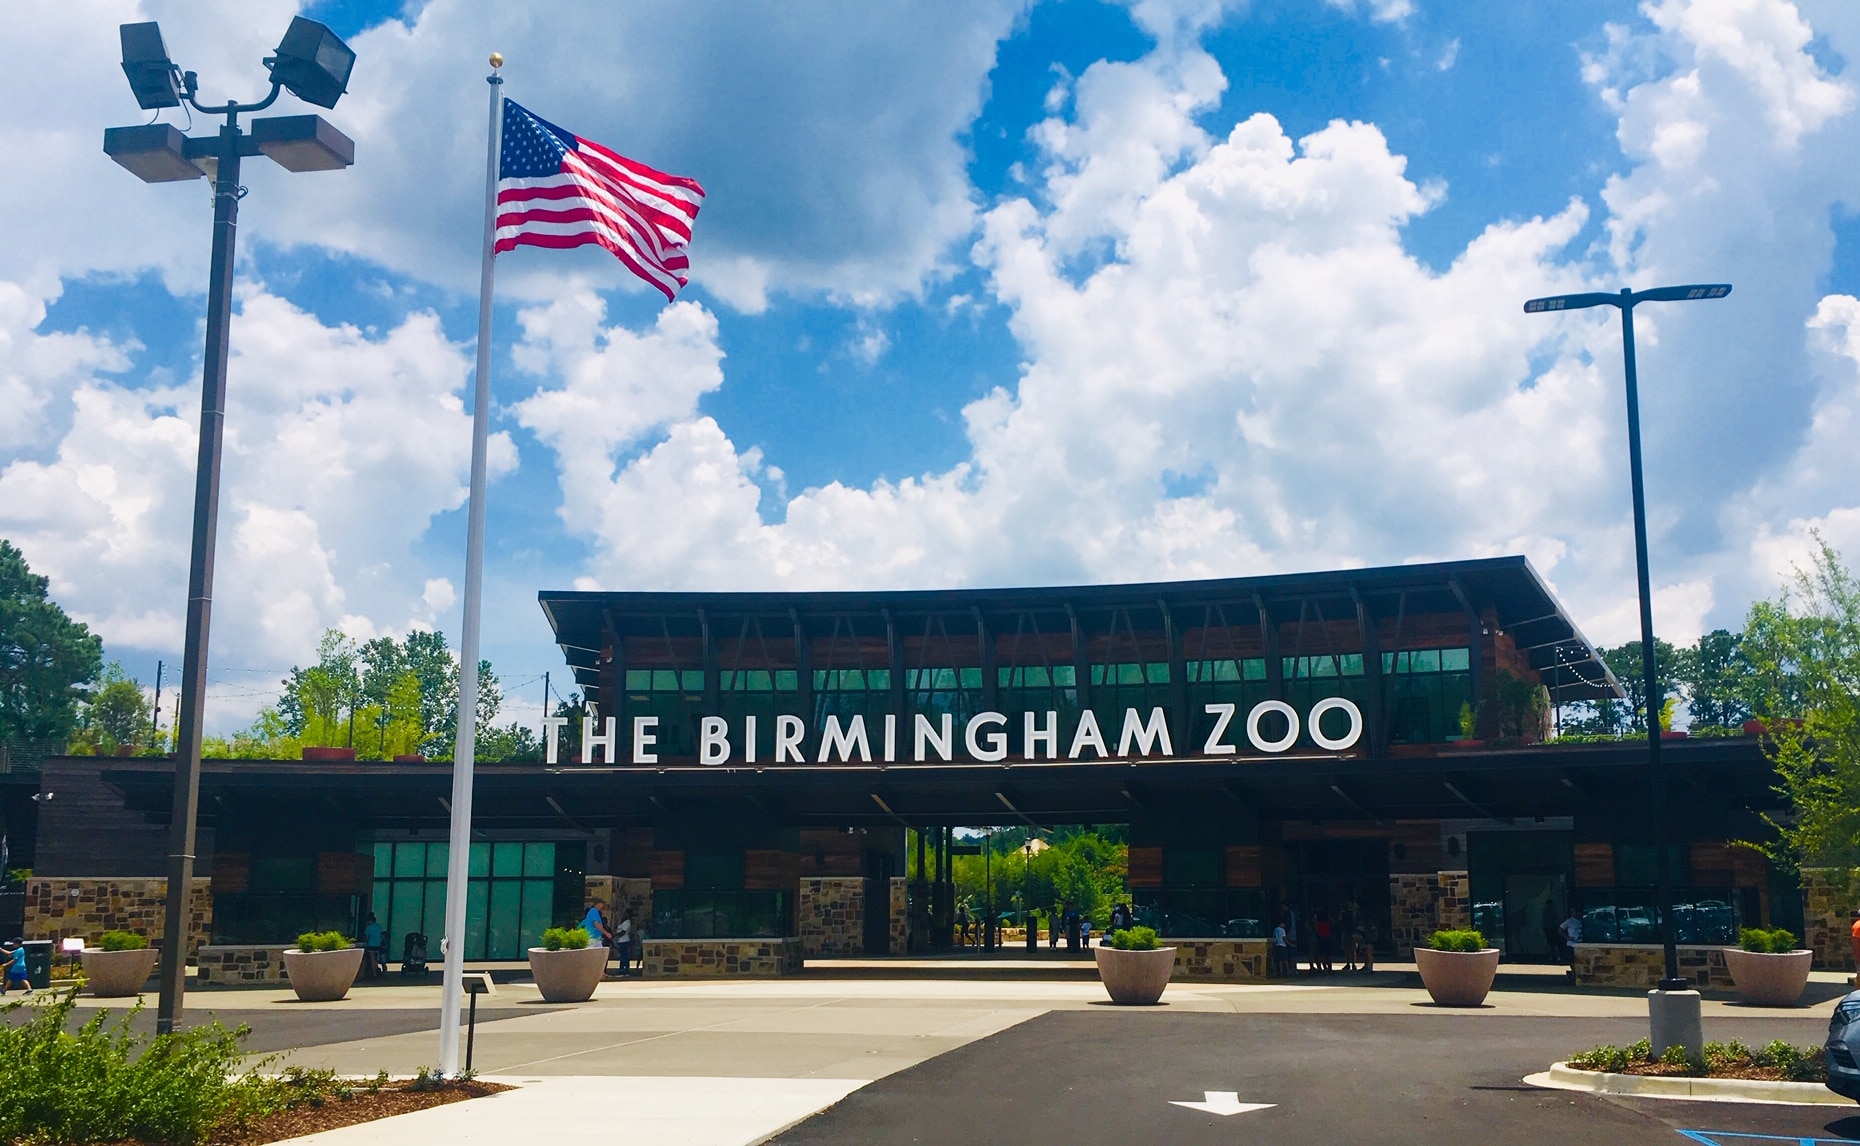 IMG 9378 Now that's a grand entrance! Birmingham Zoo opens new Arrival Experience and Welcome Plaza (Photos)